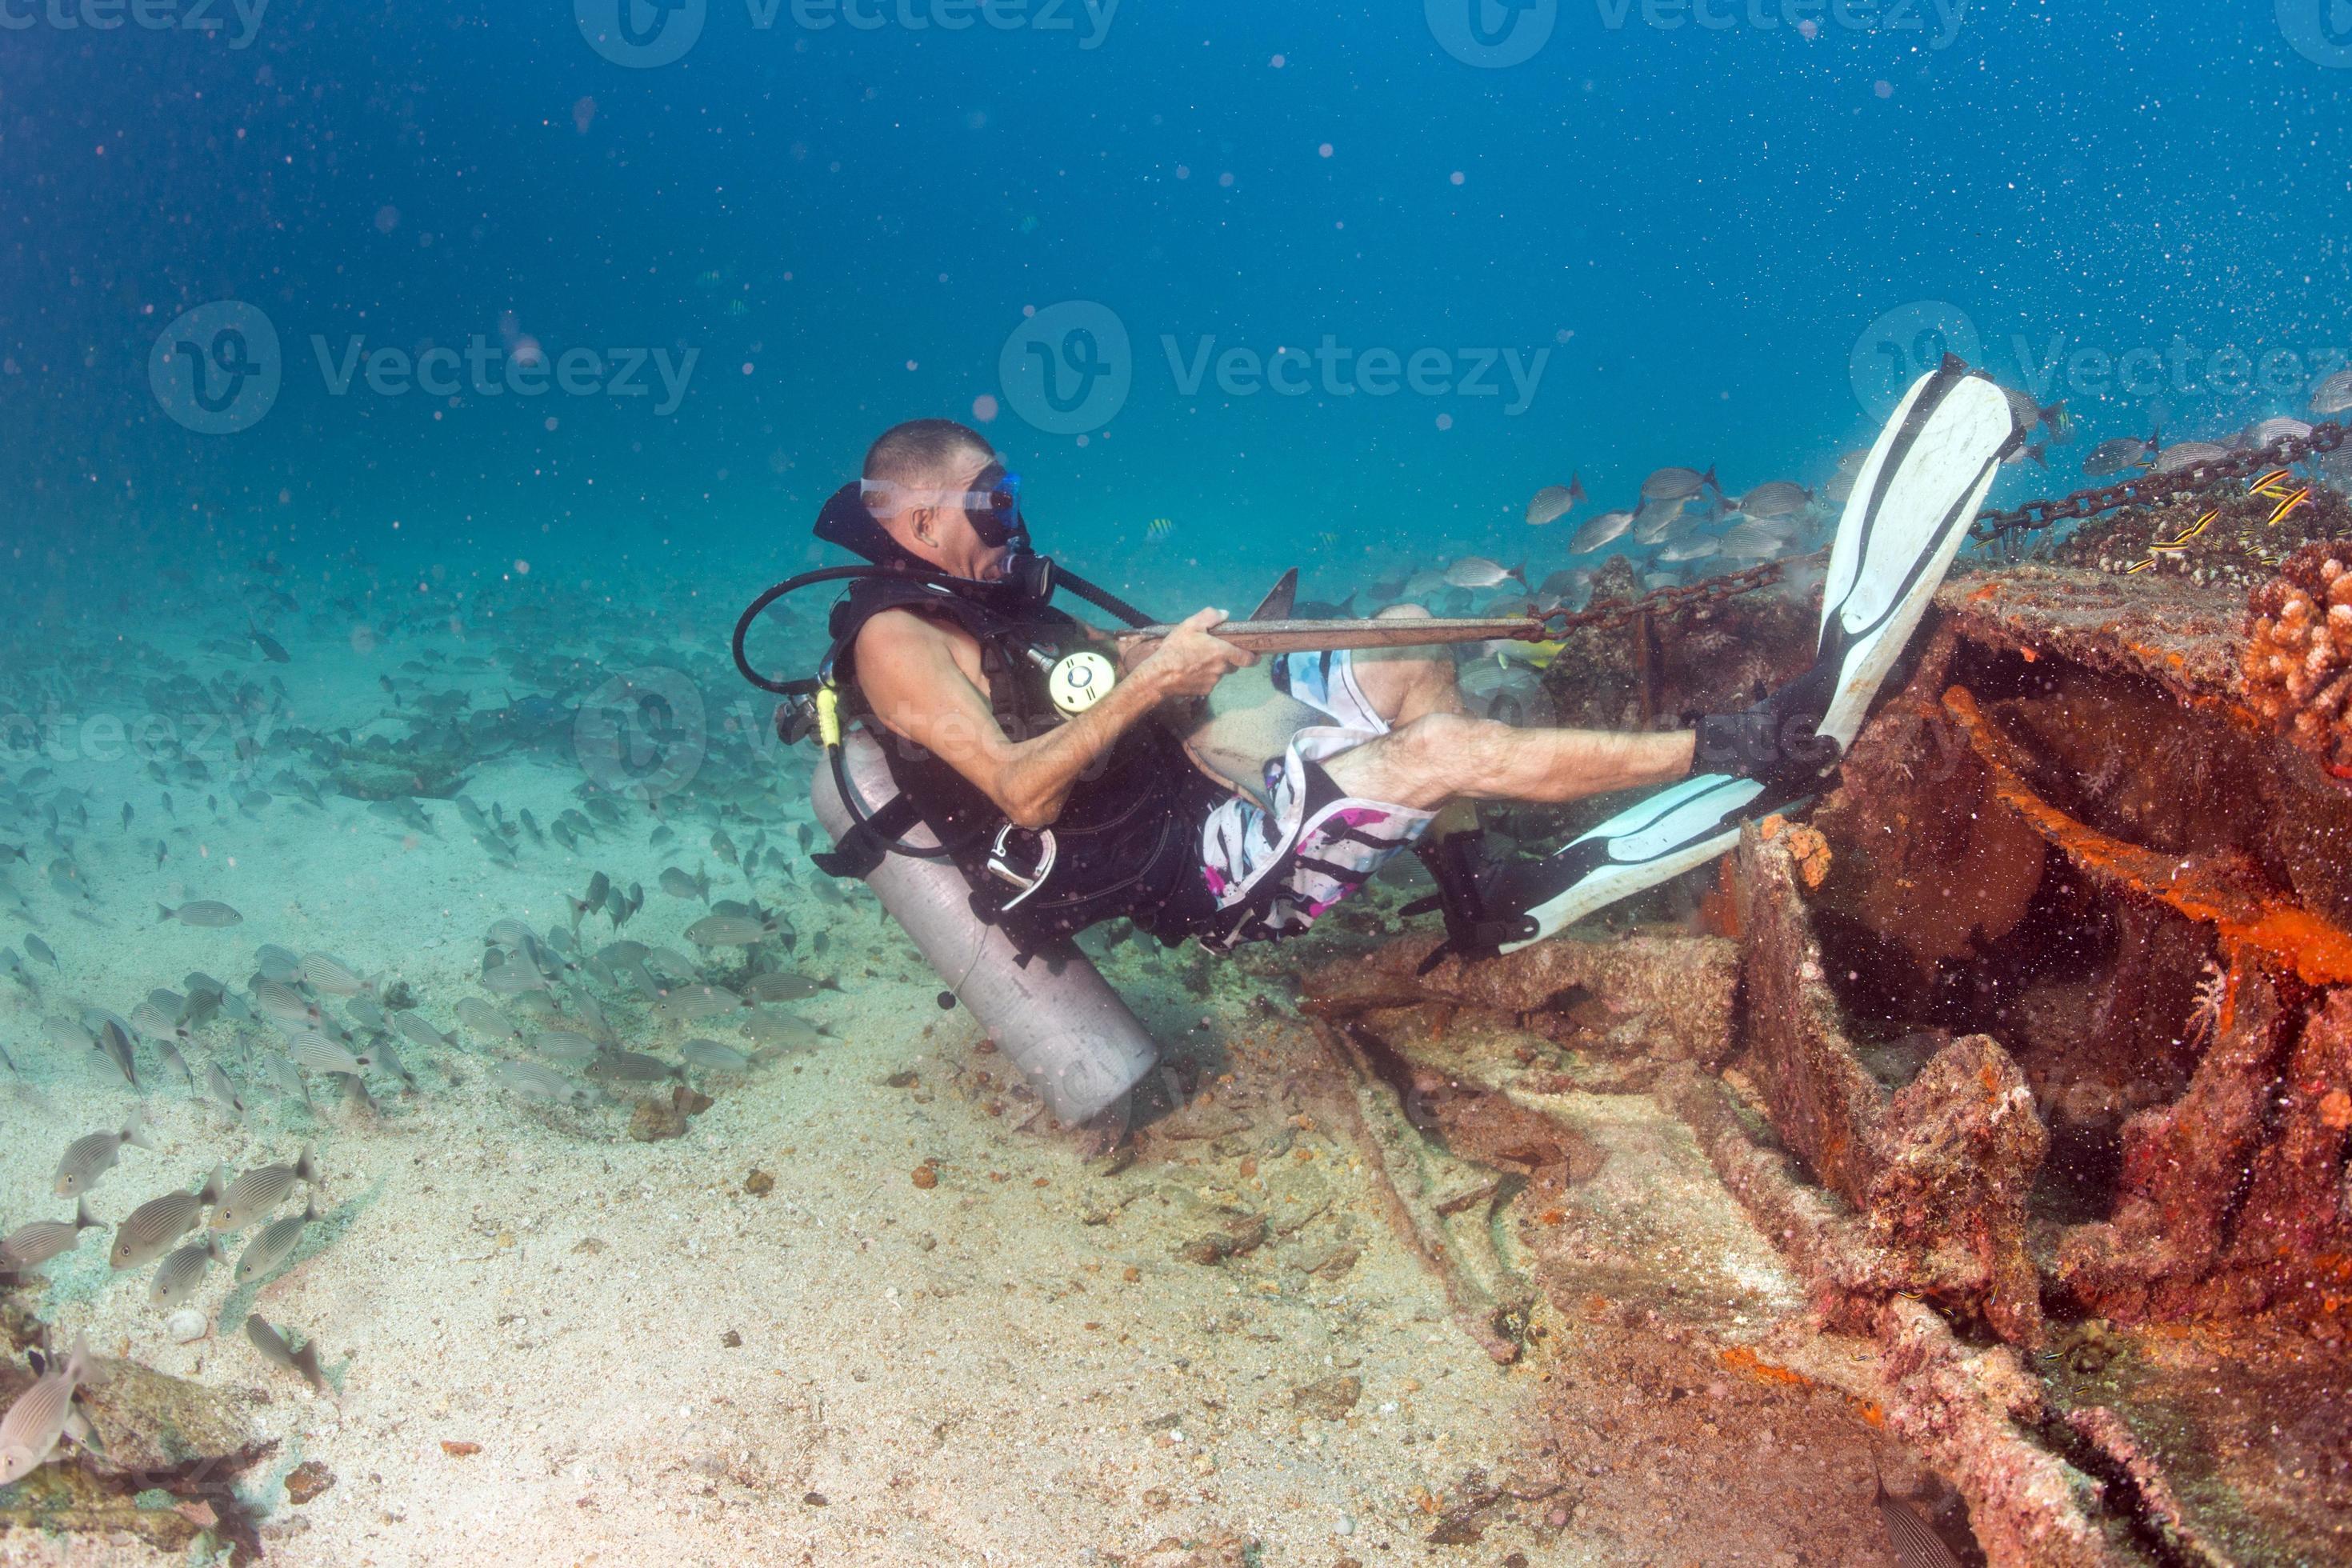 https://static.vecteezy.com/system/resources/previews/020/420/493/large_2x/diver-holding-boat-anchor-from-underwater-photo.JPG